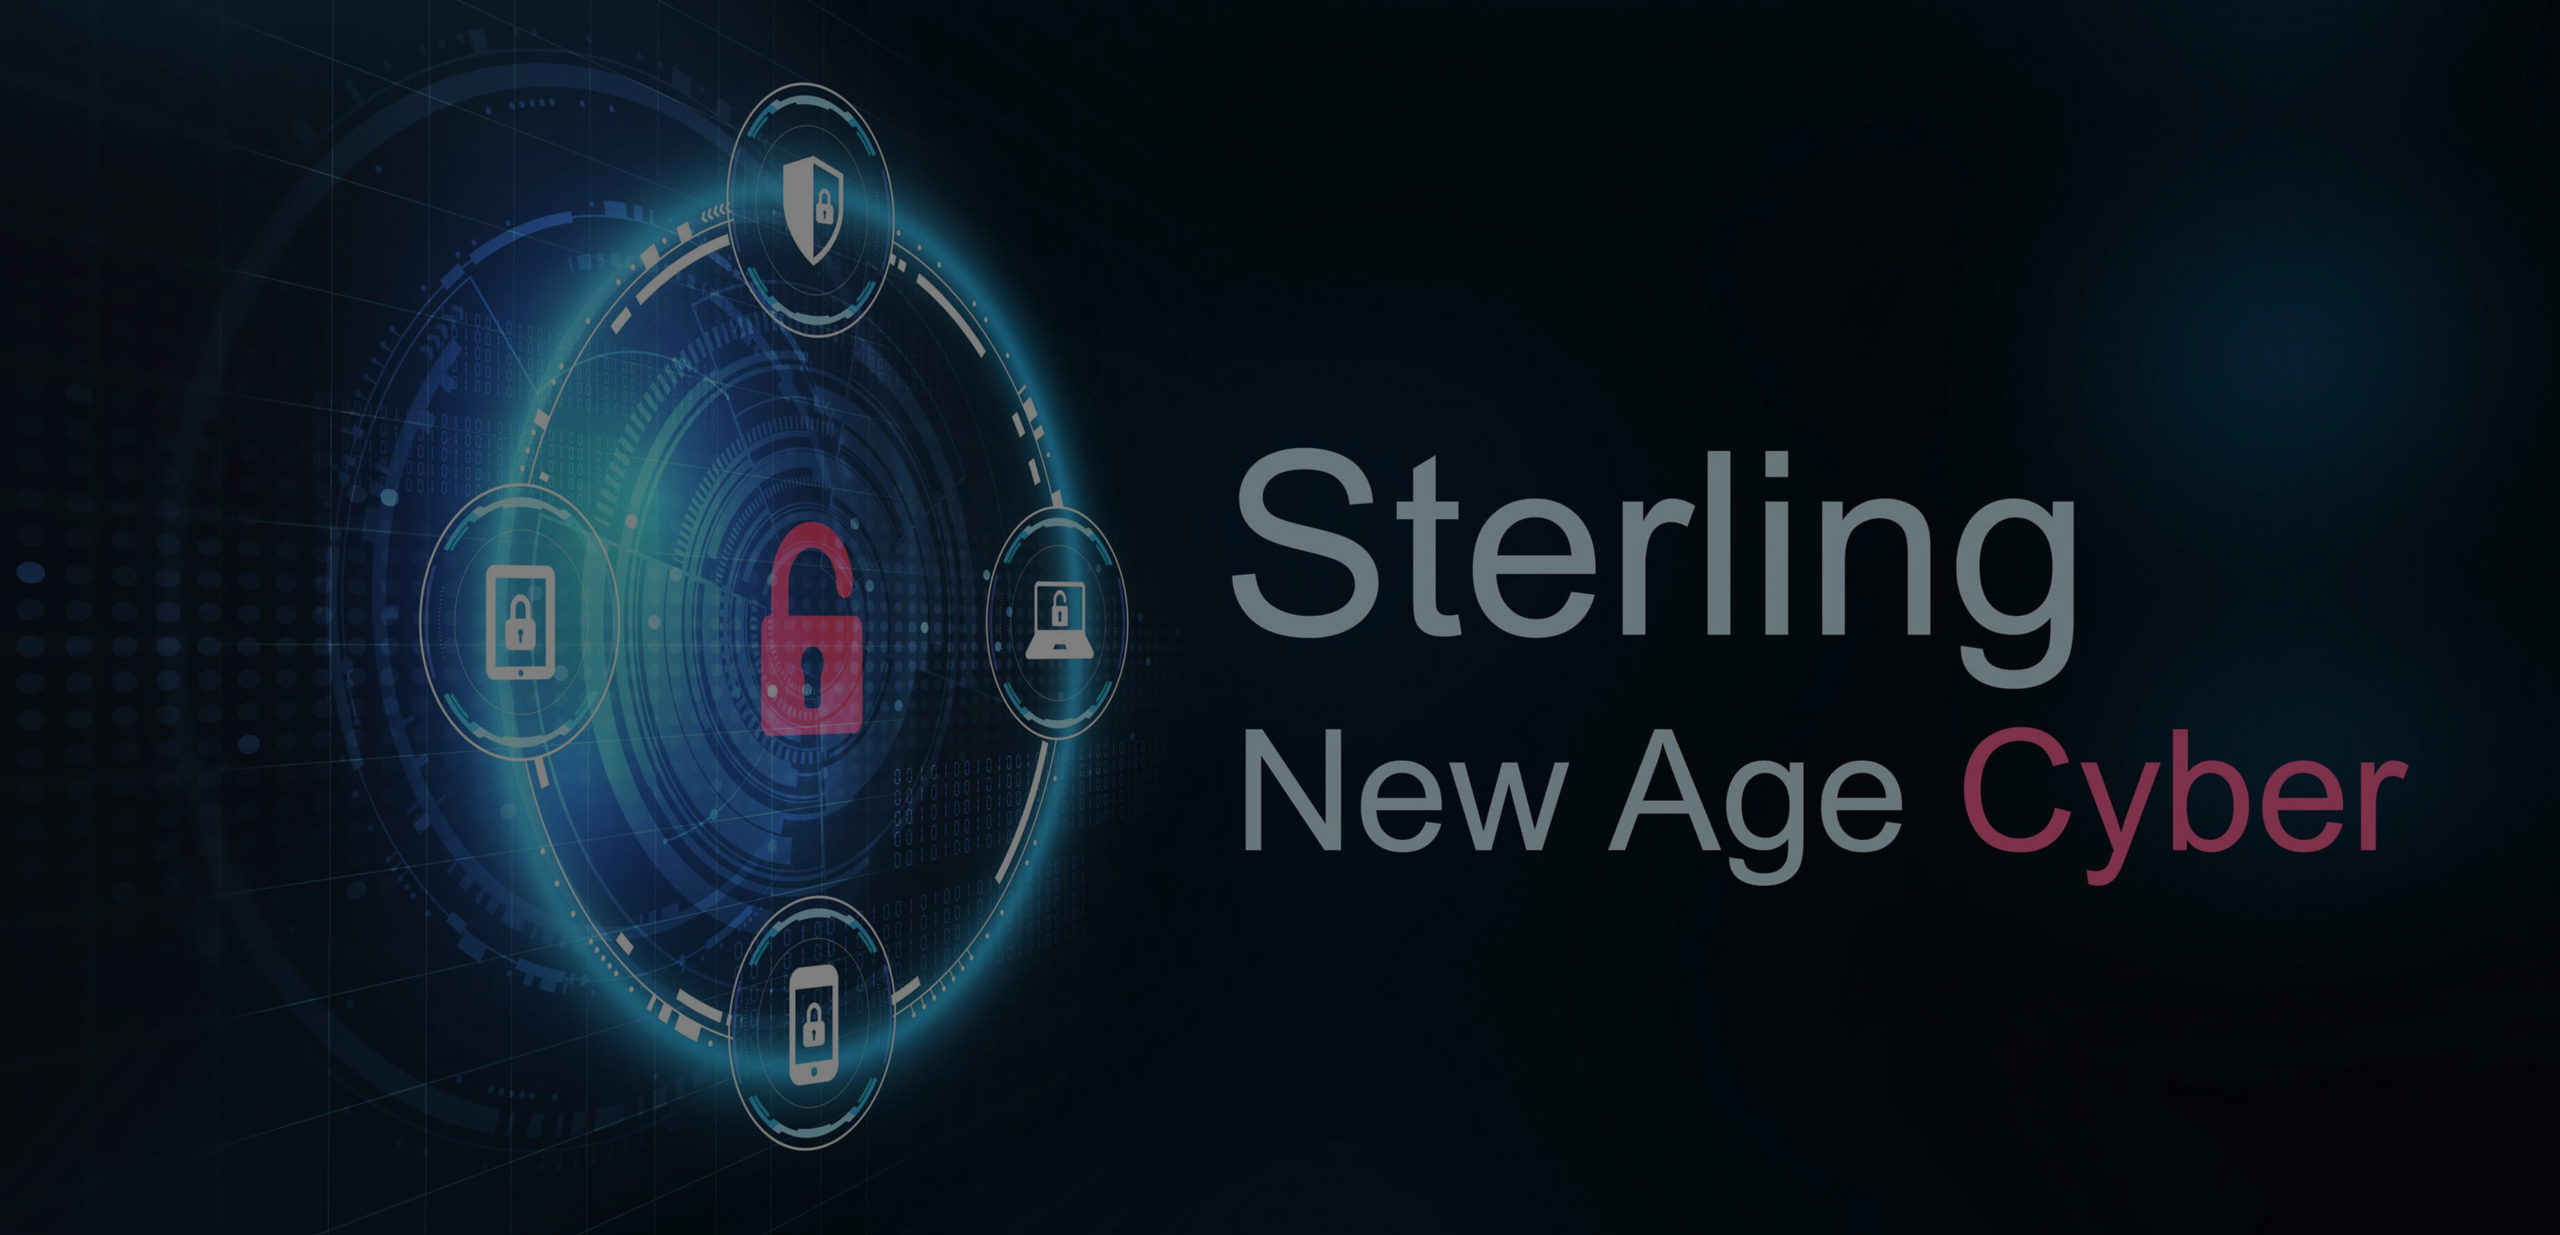 Bolton Street Programs Partners with Elpha Secure to Launch <em>Sterling New Age Cyber</em>